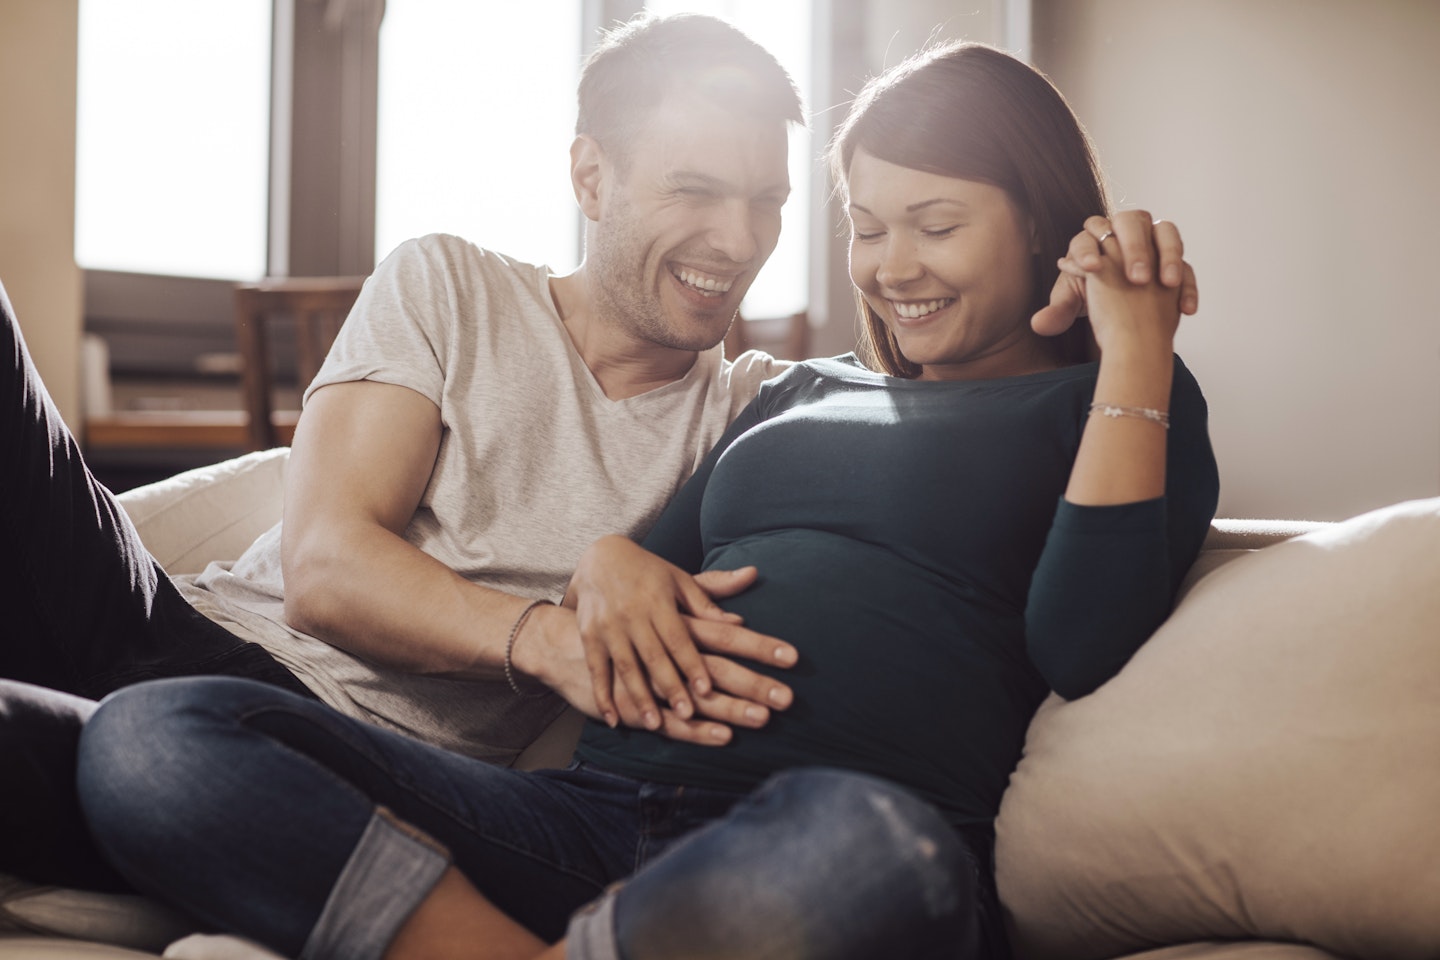 Pregnant woman and partner feeling her bump